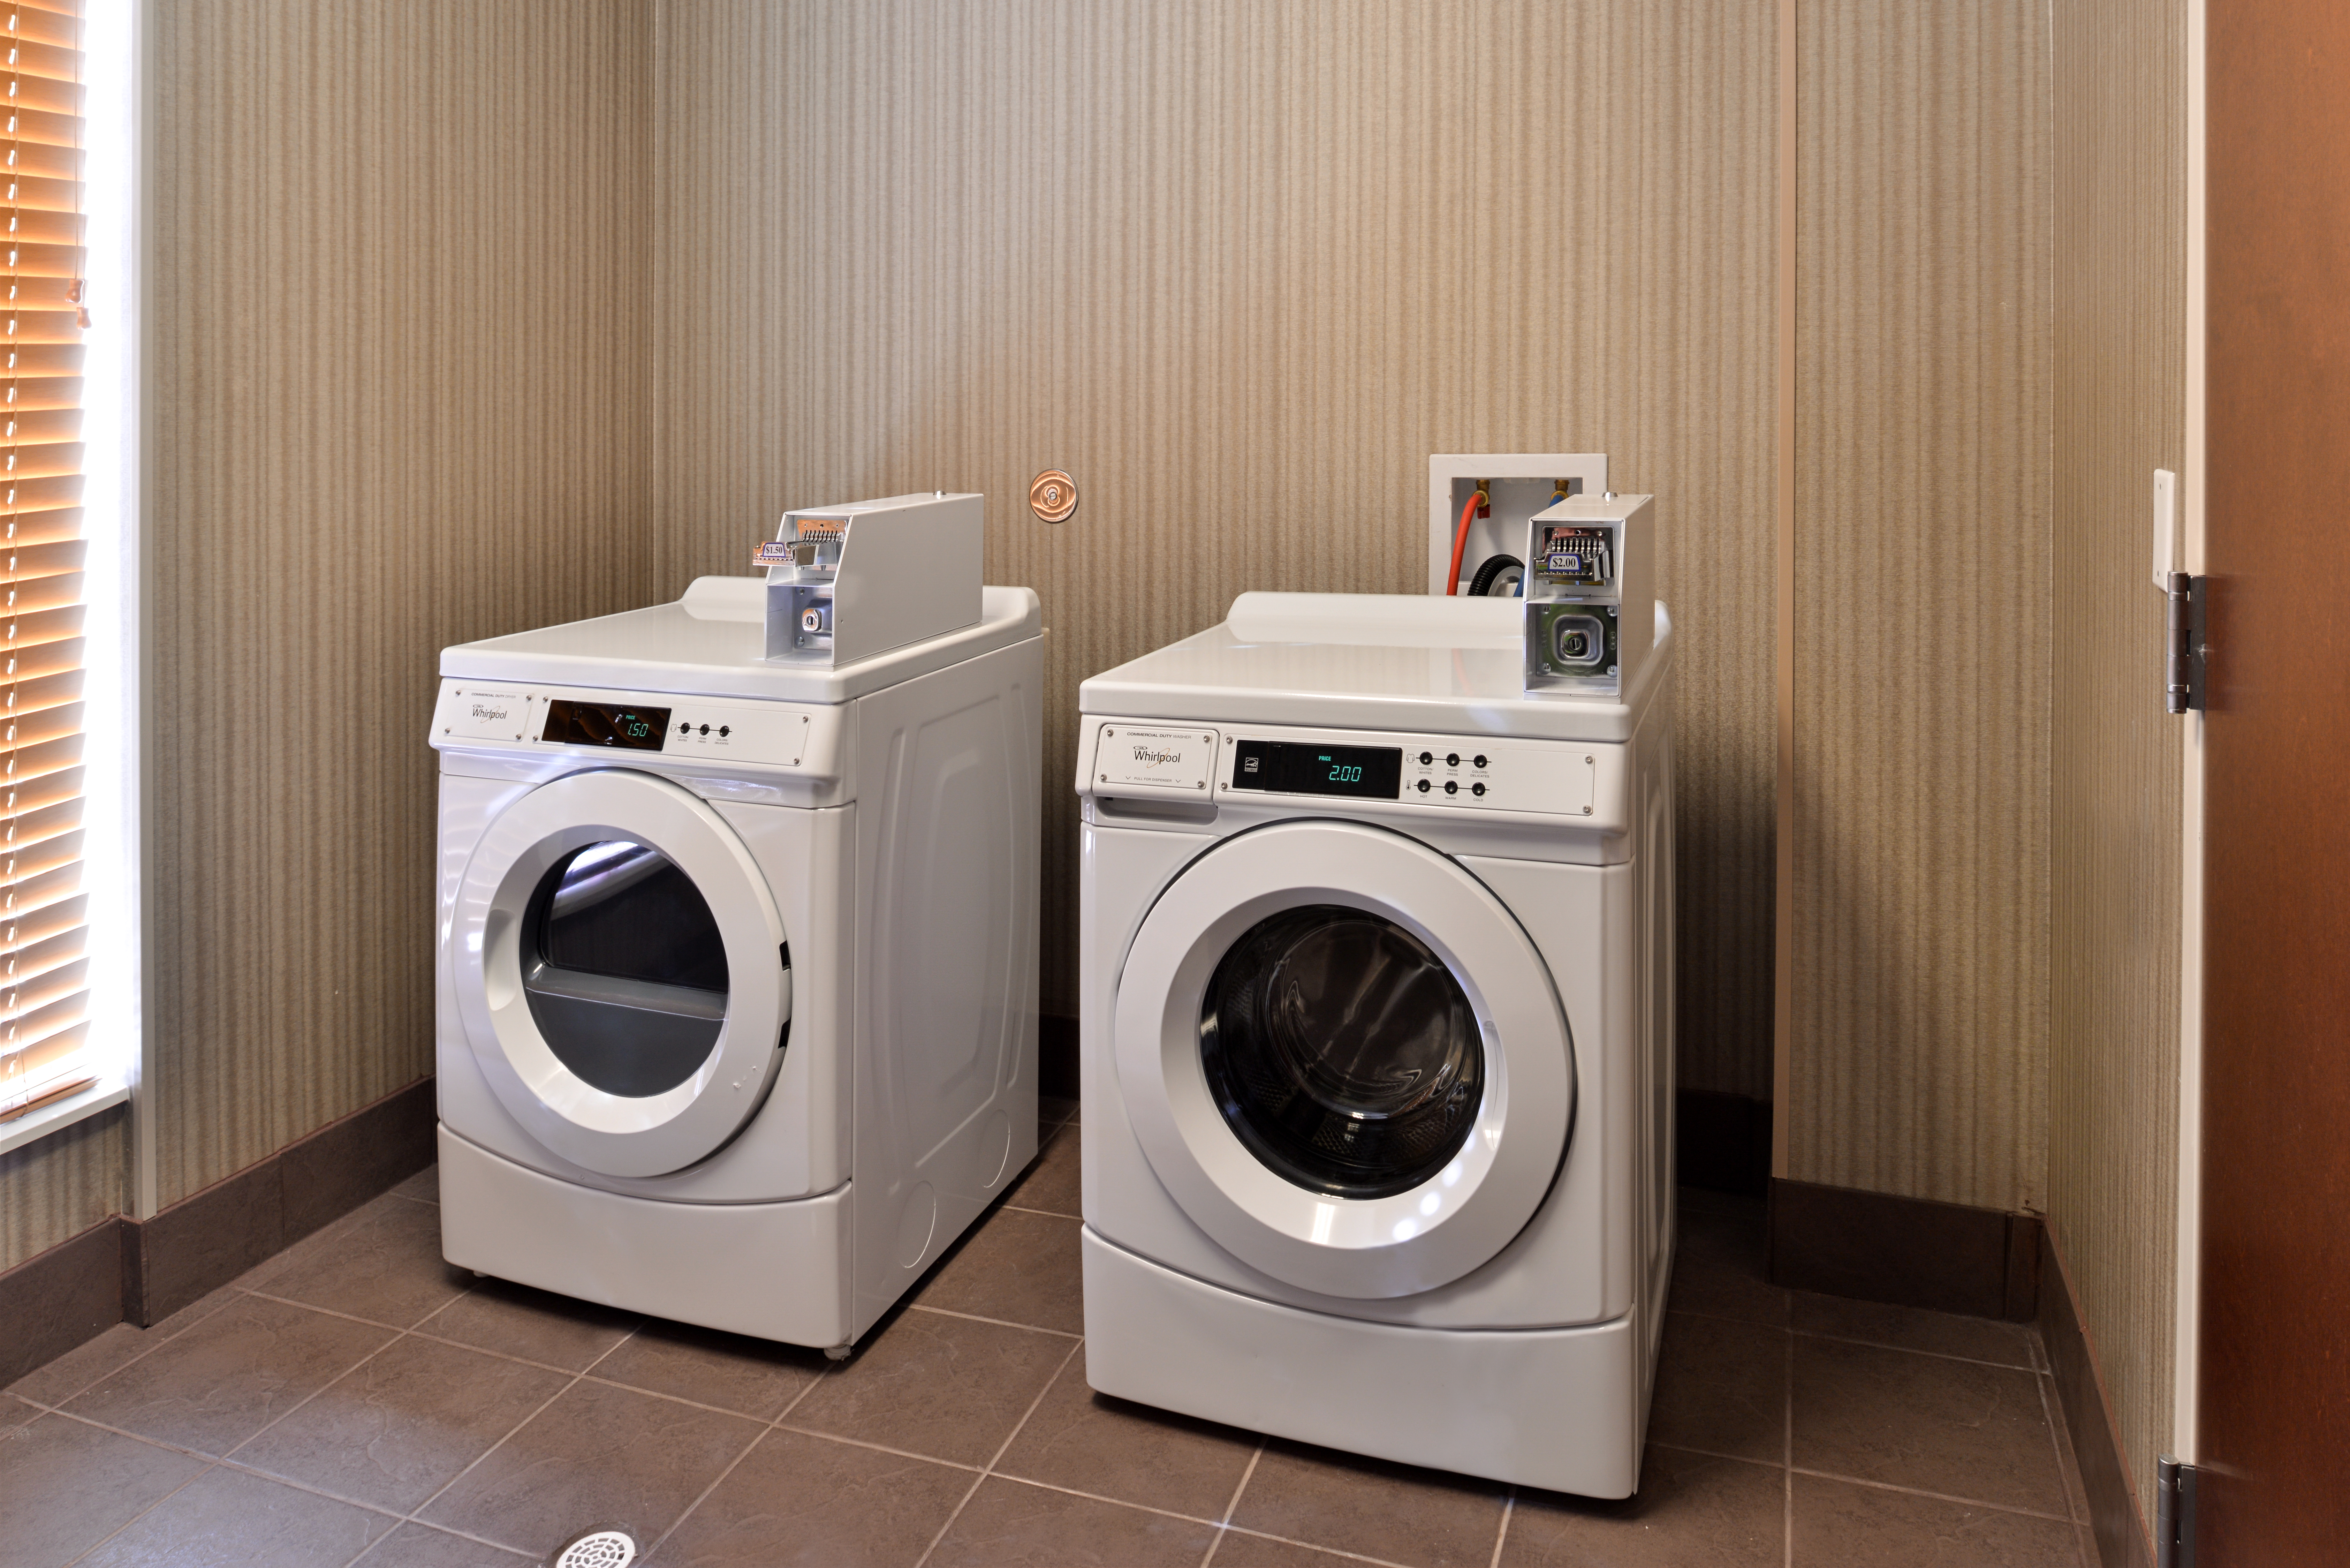 Laundry Room With Coin Operated Washing and Drying Machines